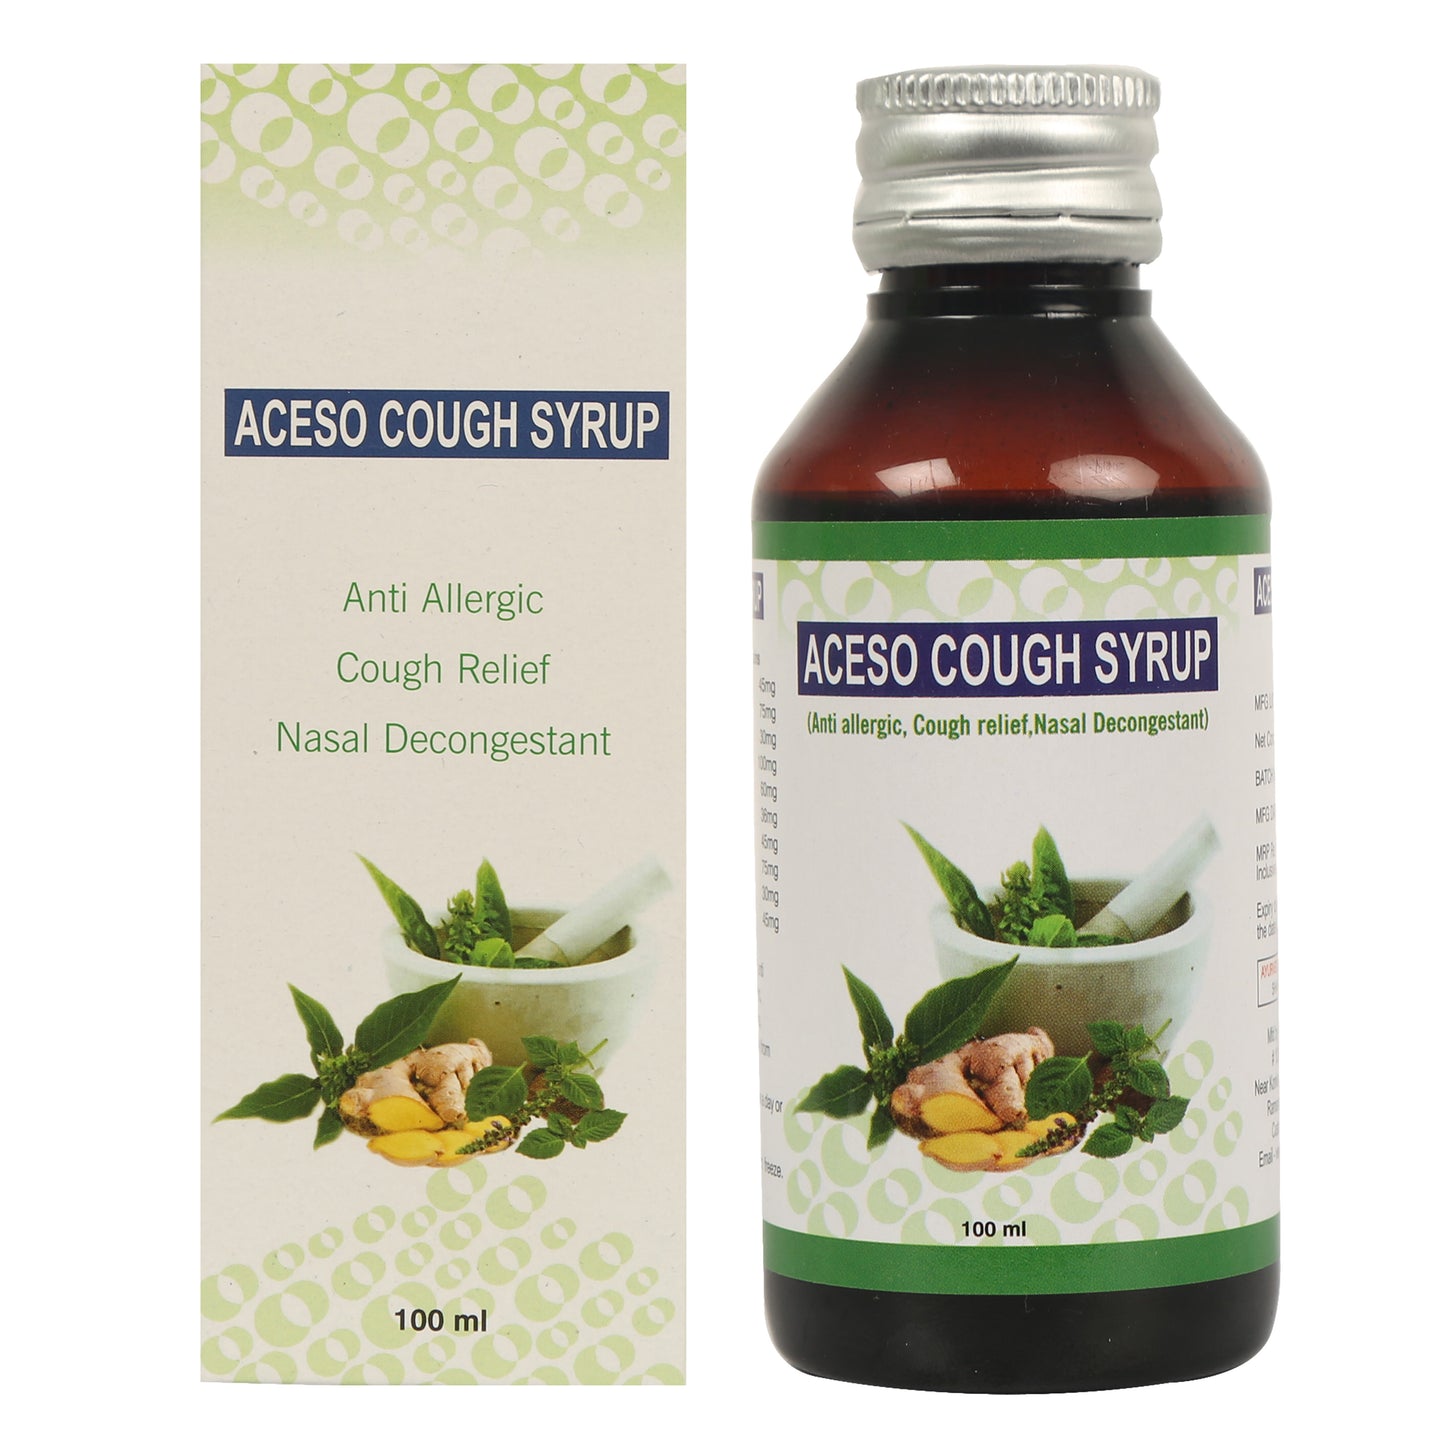 Aceso Cough Syrup